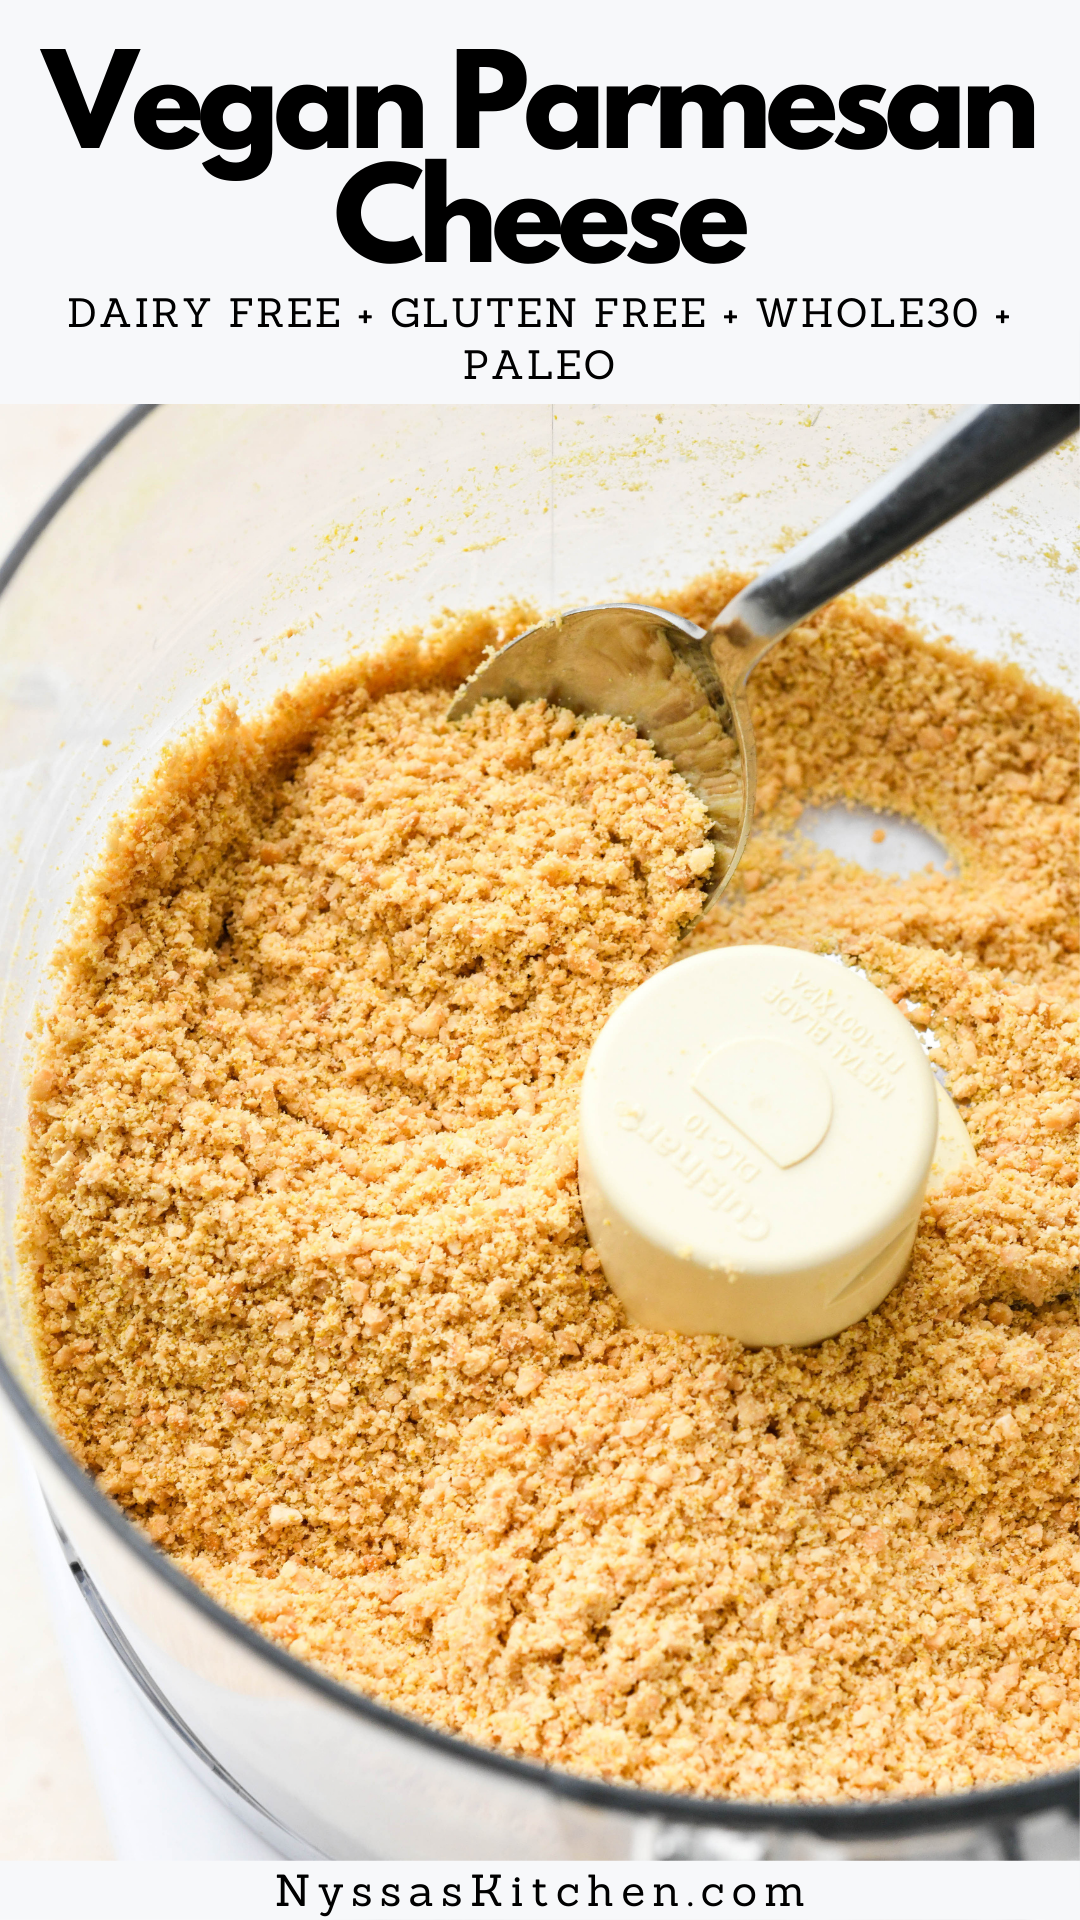 This homemade vegan parmesan cheese is the ultimate dairy free alternative for parm. It is healthy, savory, made with just 5 ingredients, and keeps well in the refrigerator for several weeks at a time. Vegan, gluten free, dairy free, paleo, and Whole30 compatible.